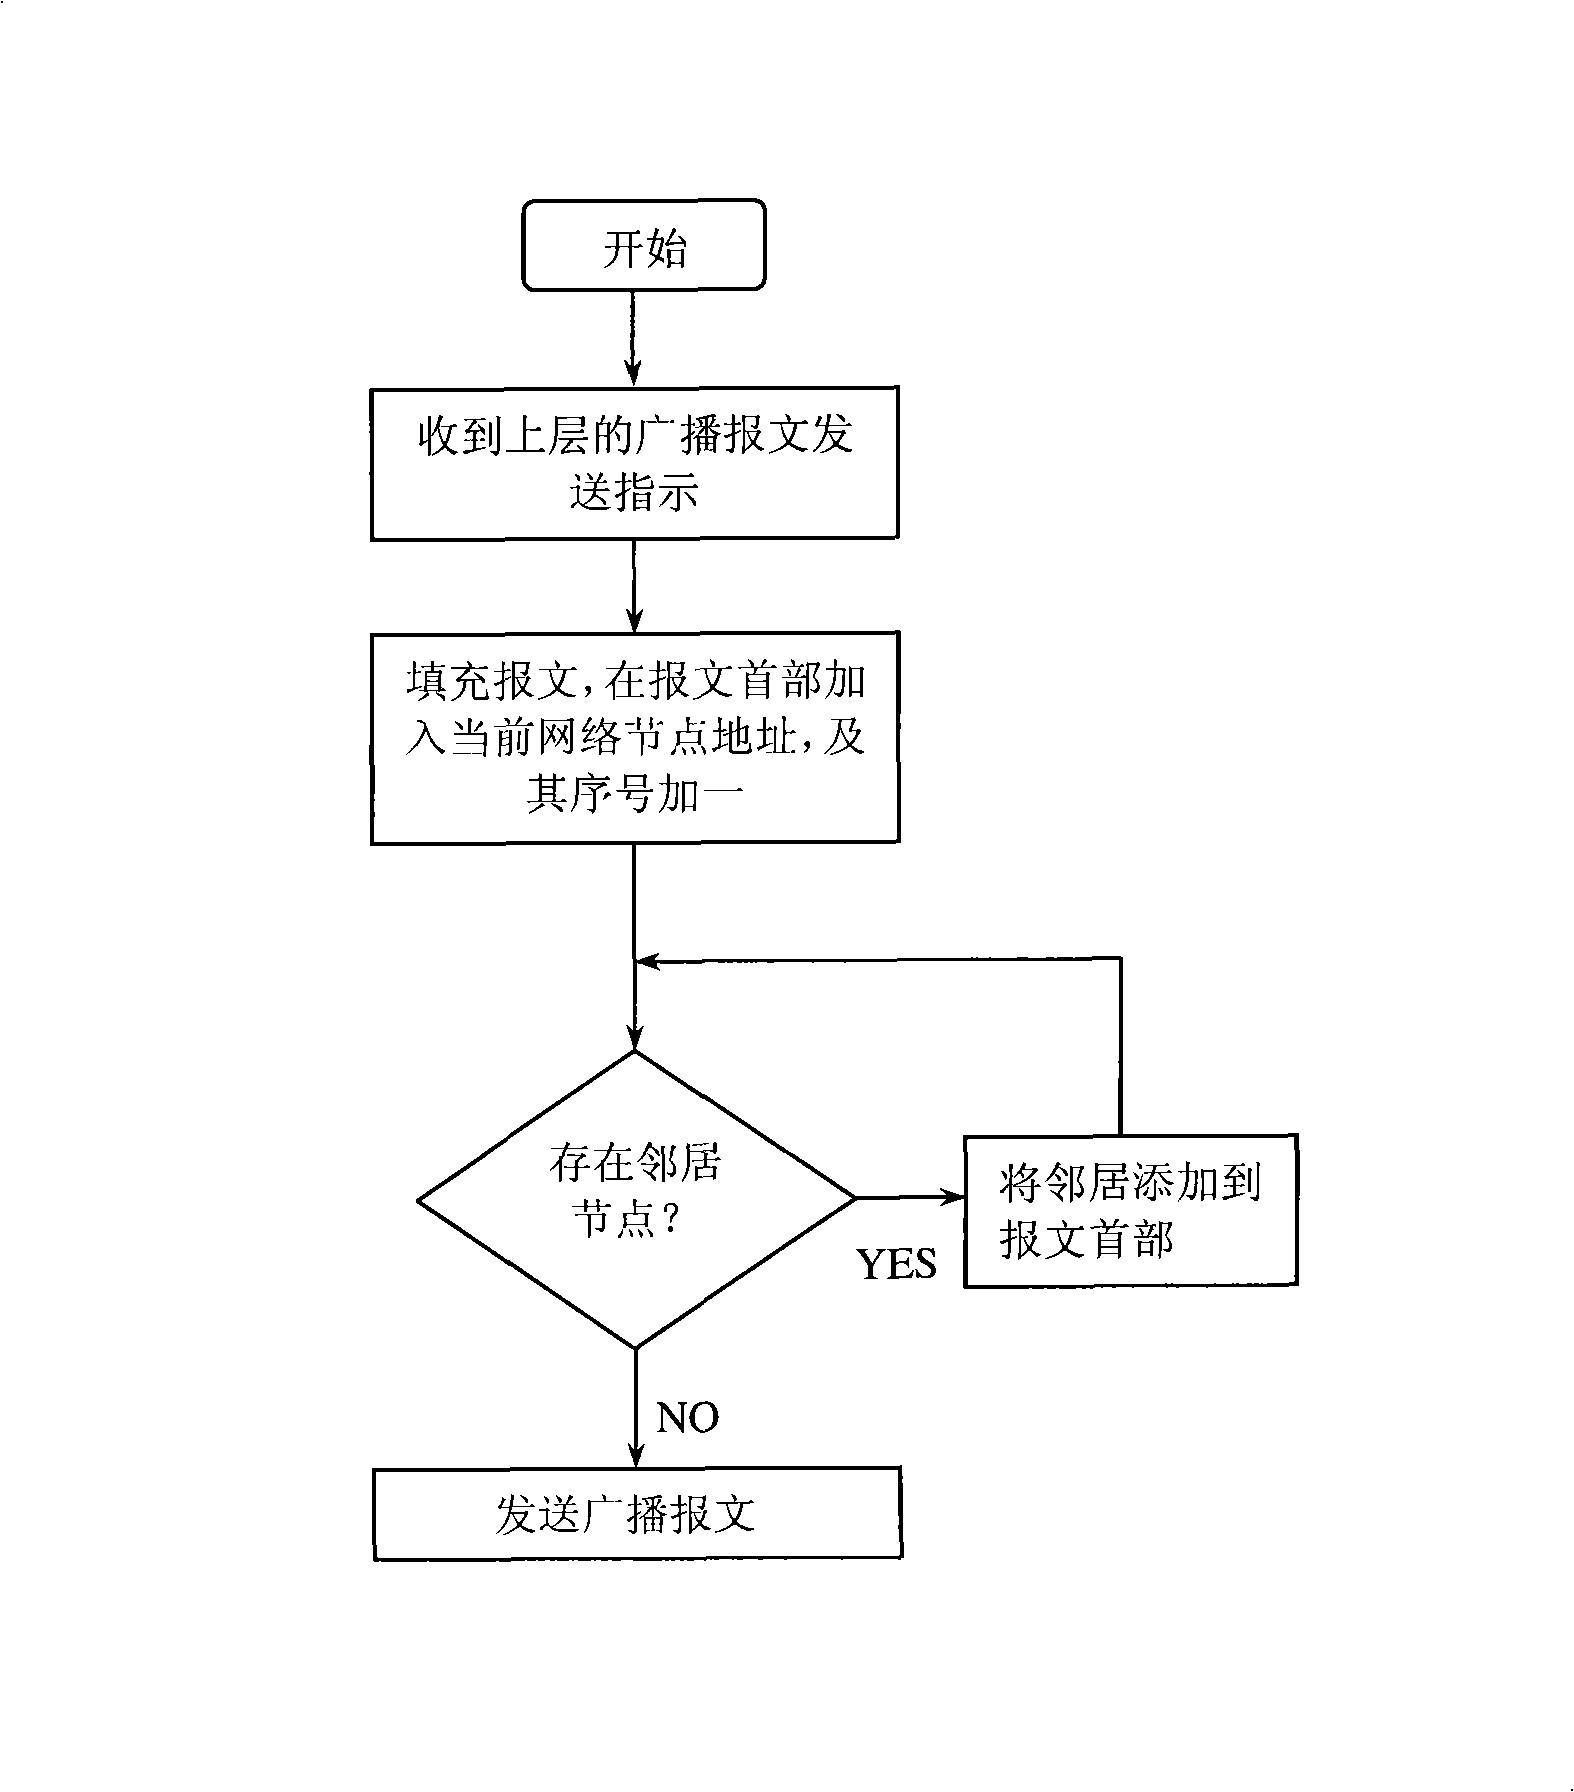 Method for diffusing route